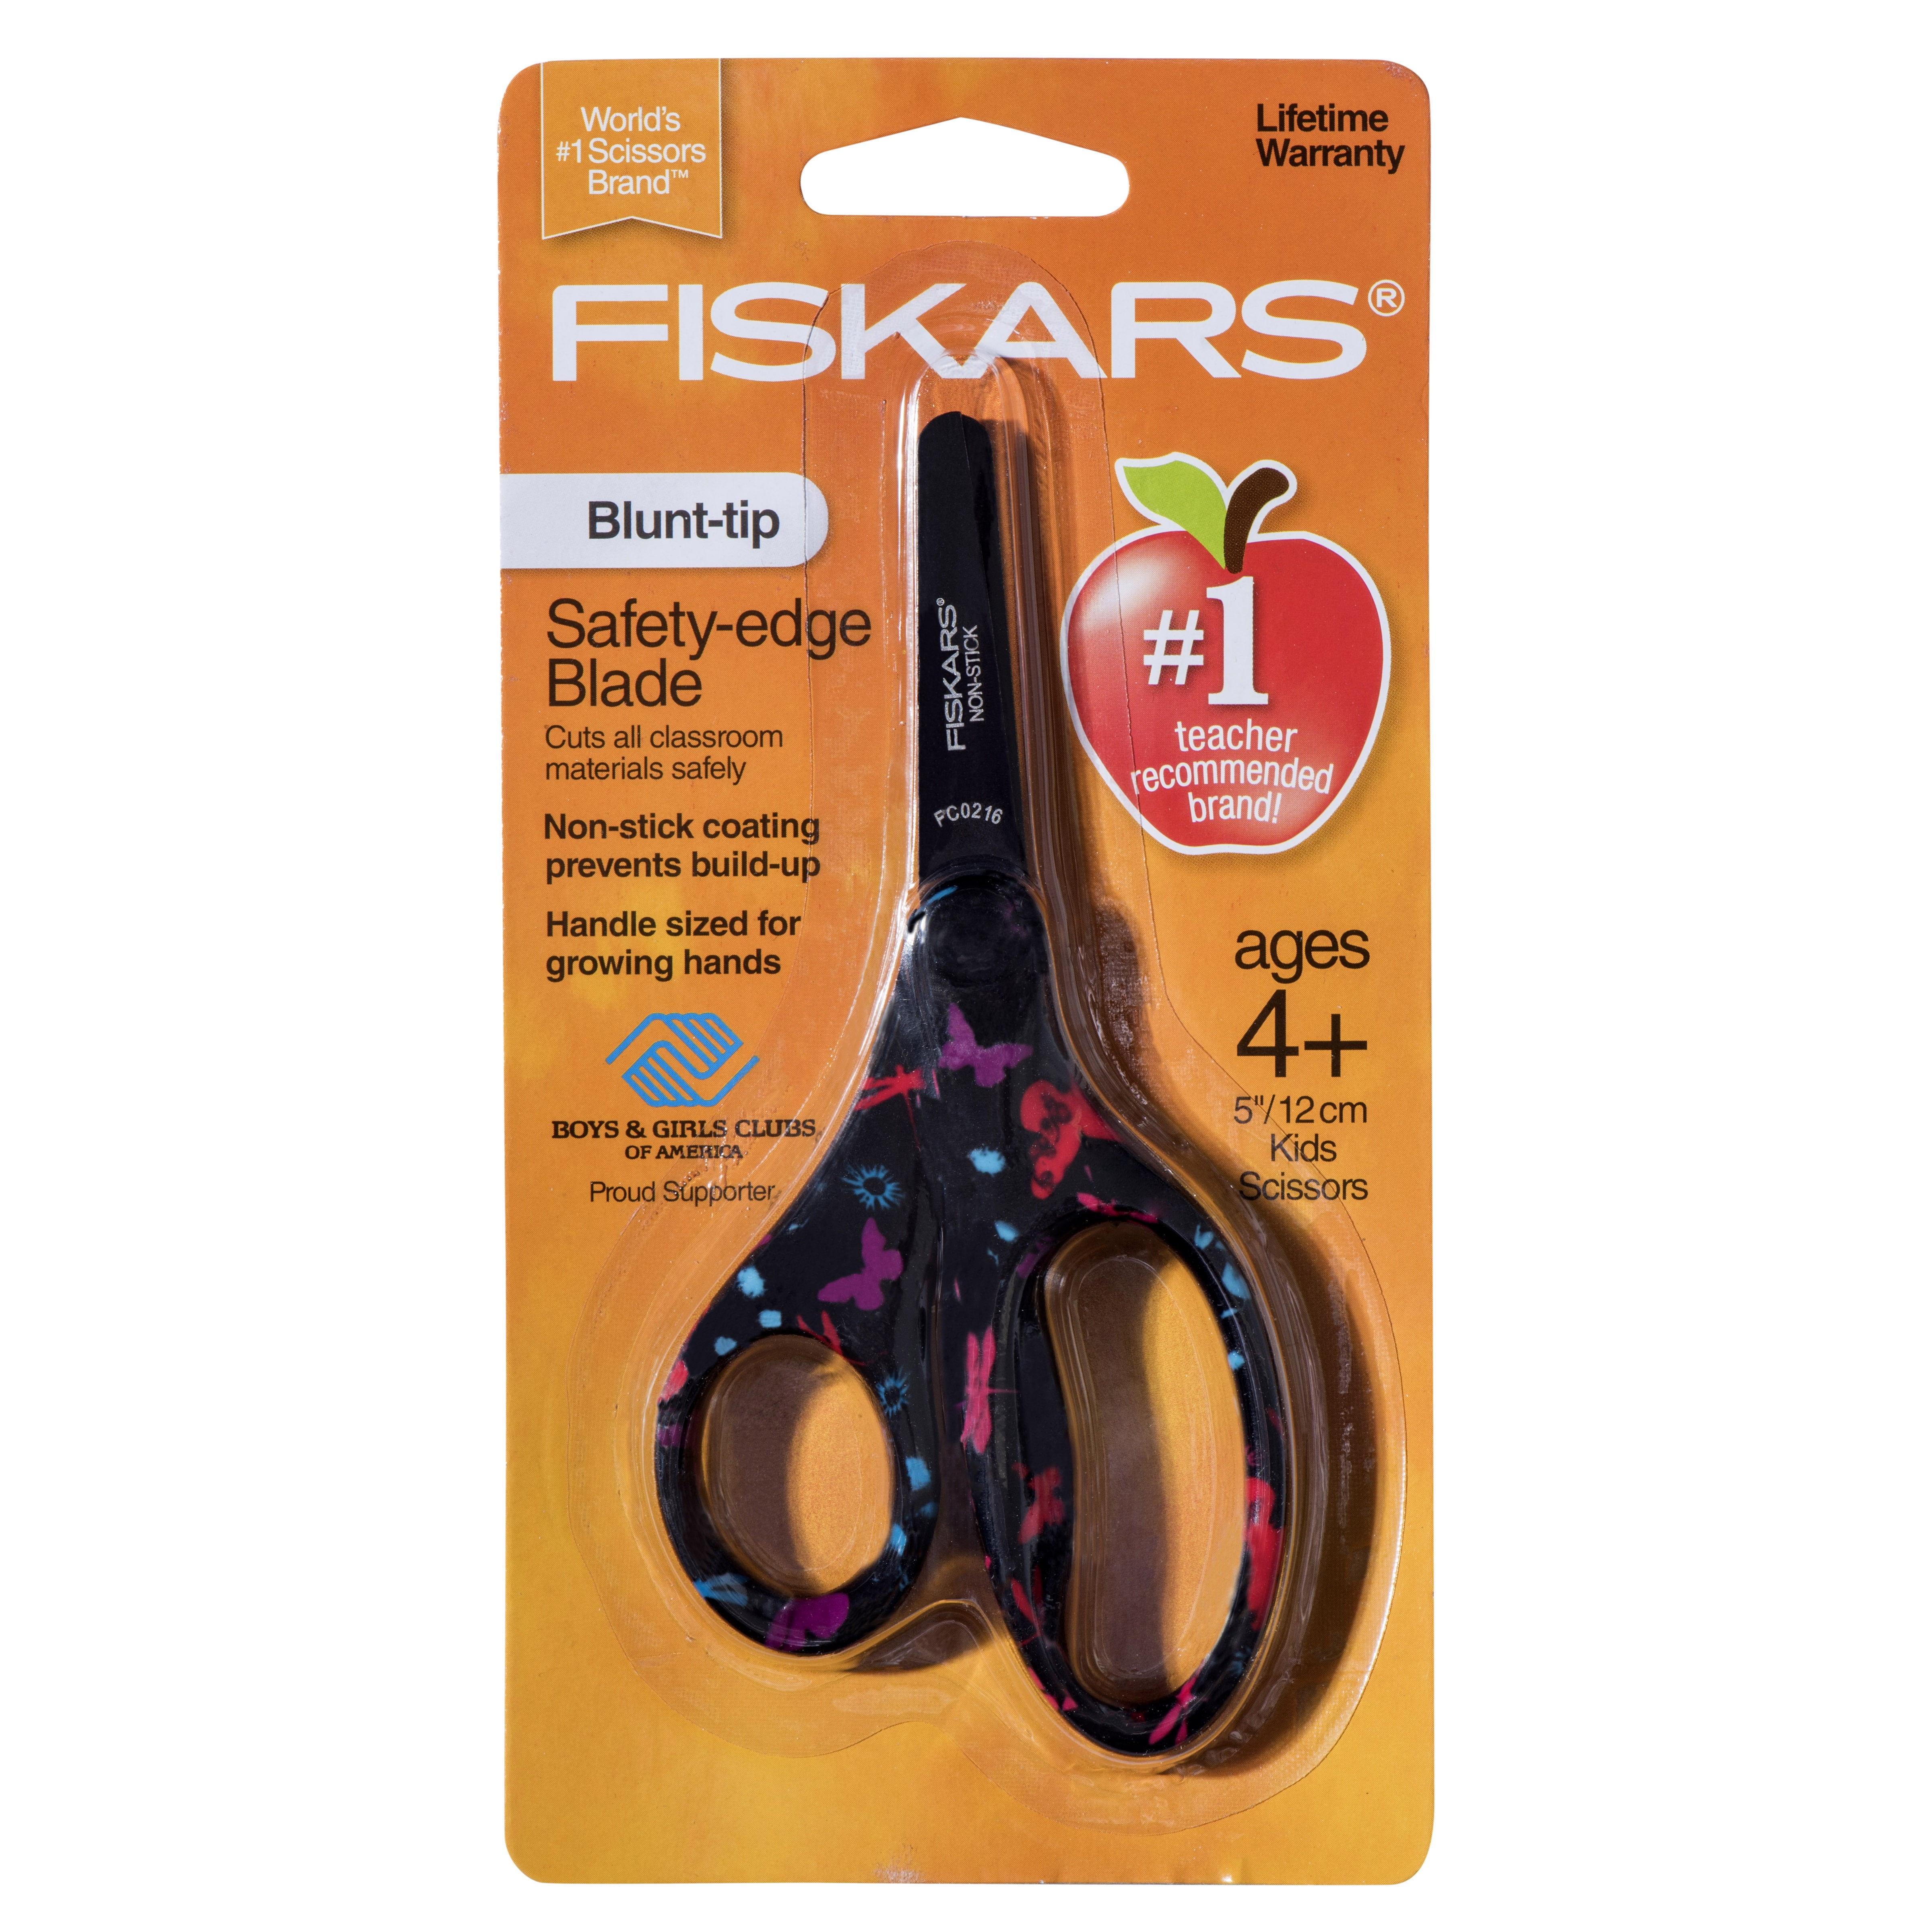 Scotch 5-Inch Kid Scissors ONLY $0.41 Each on  - Daily Deals & Coupons